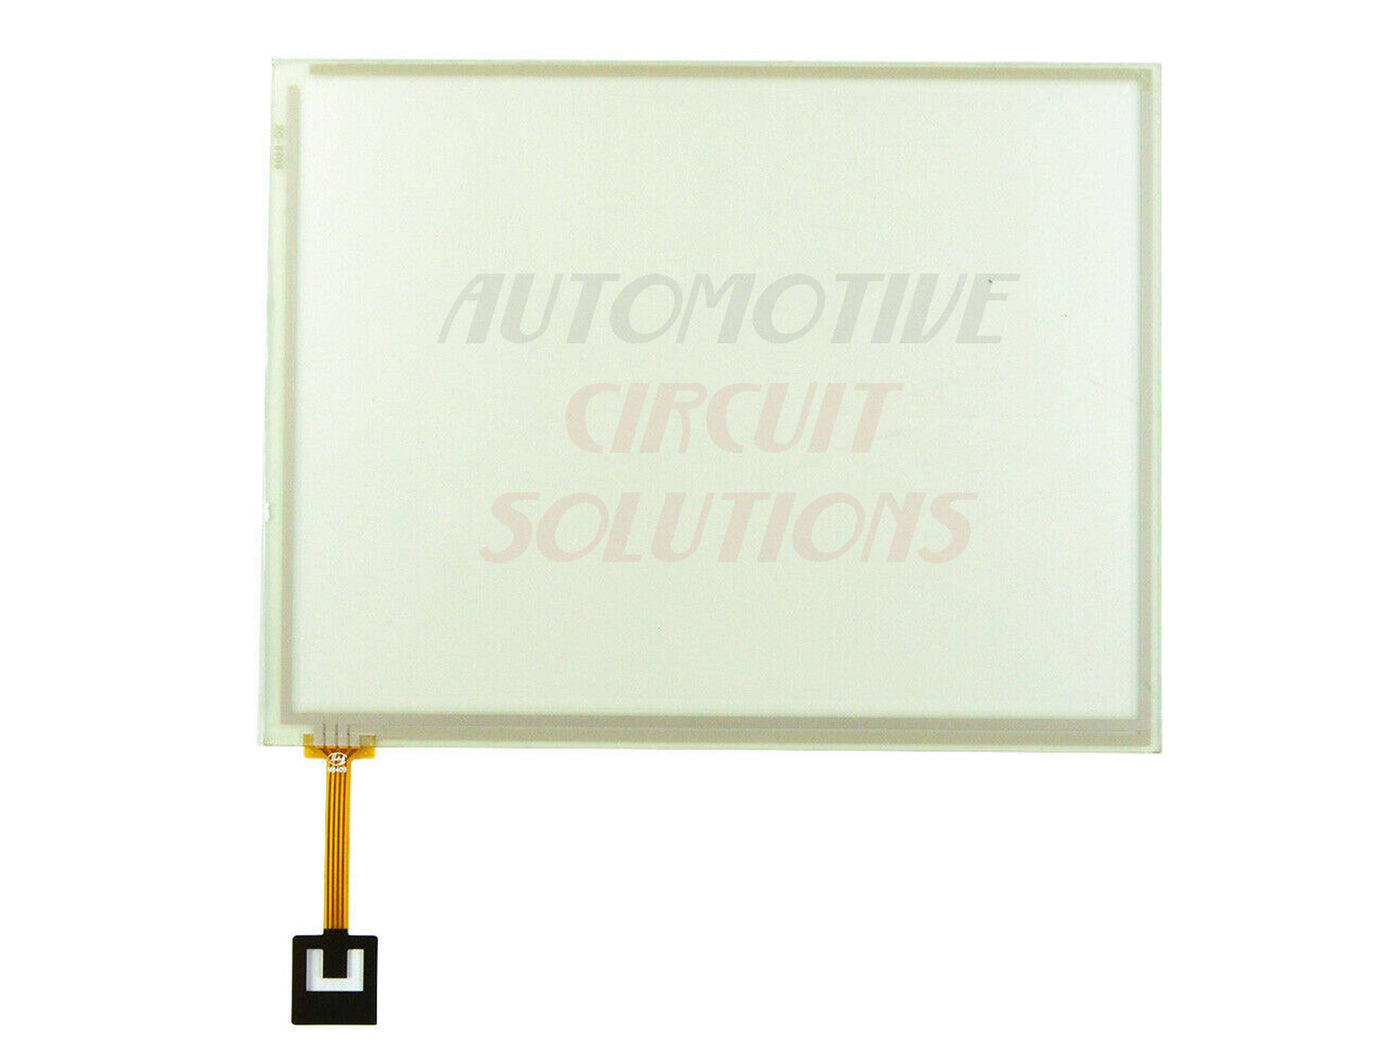 8.4inch LCD panel LAJ084T001A touch screen for Dodge Journey Chrysler 300C Grand Cherokee Fiat Maserati Automotive Circuit Solutions 